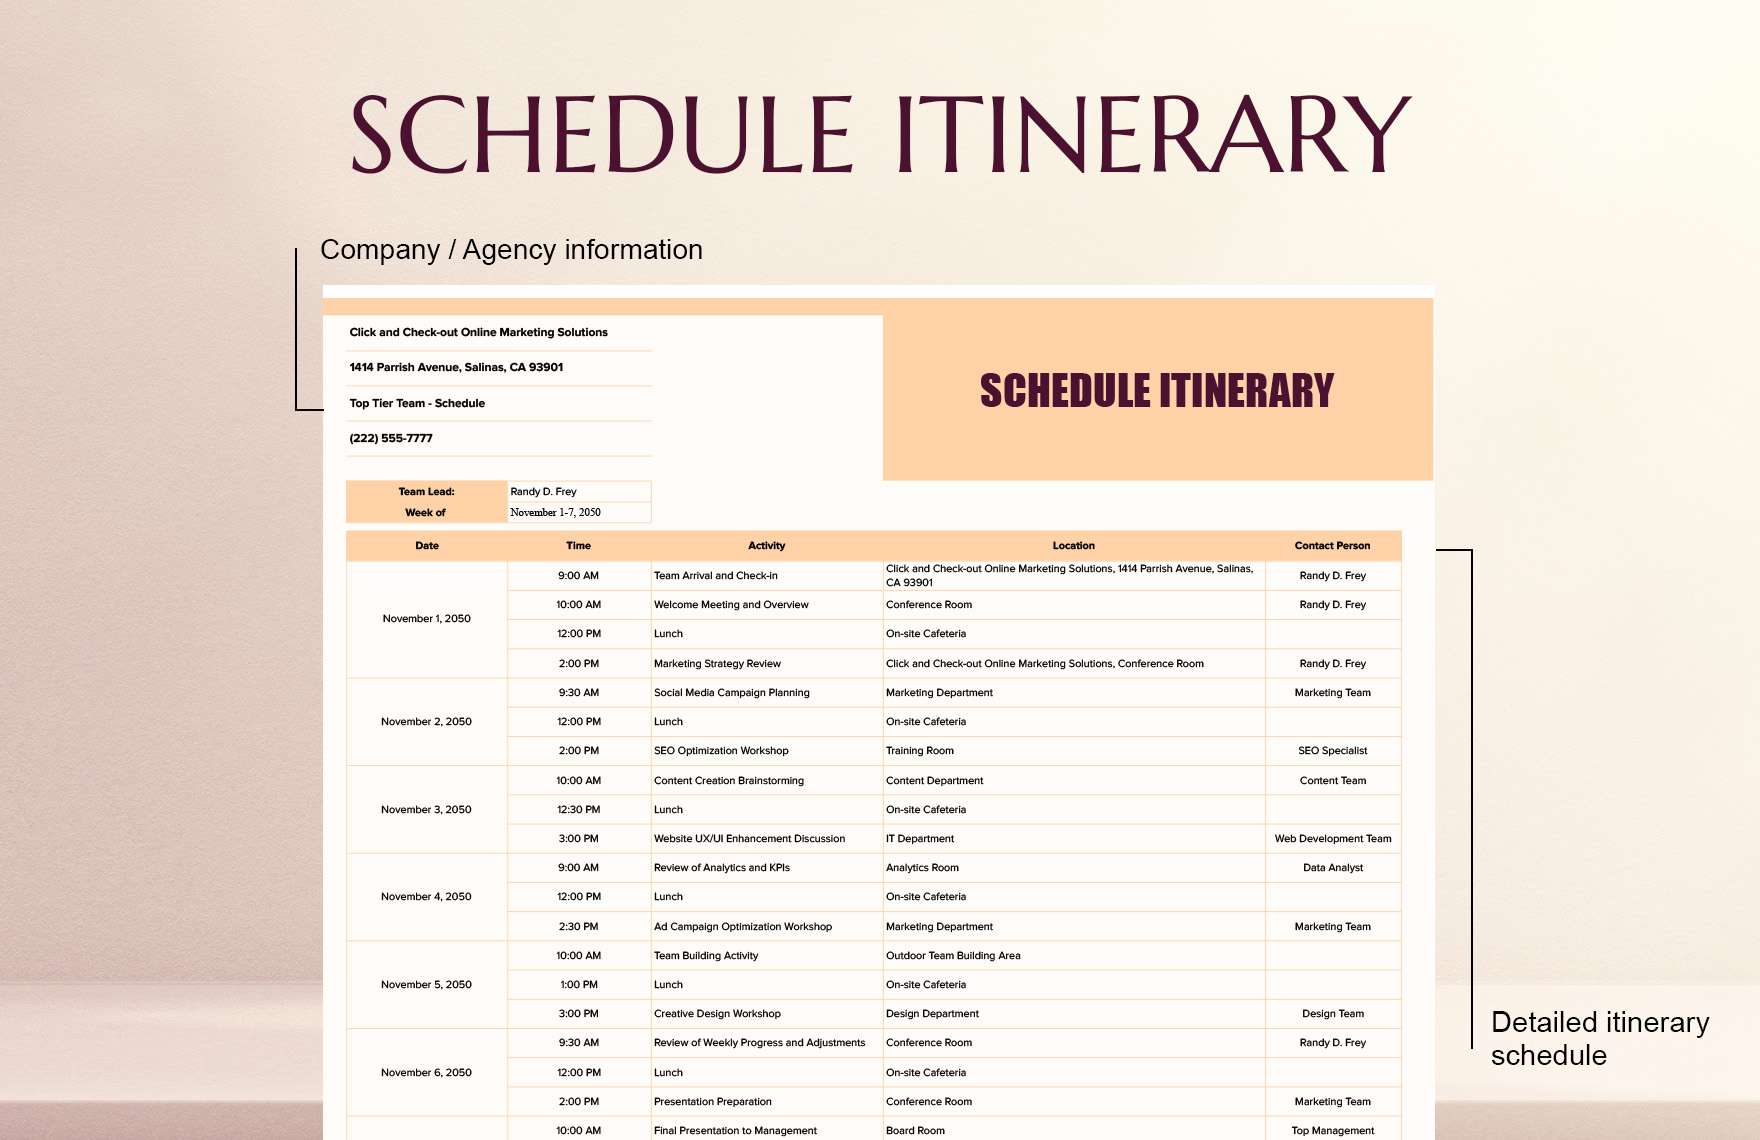 Schedule Itinerary Template